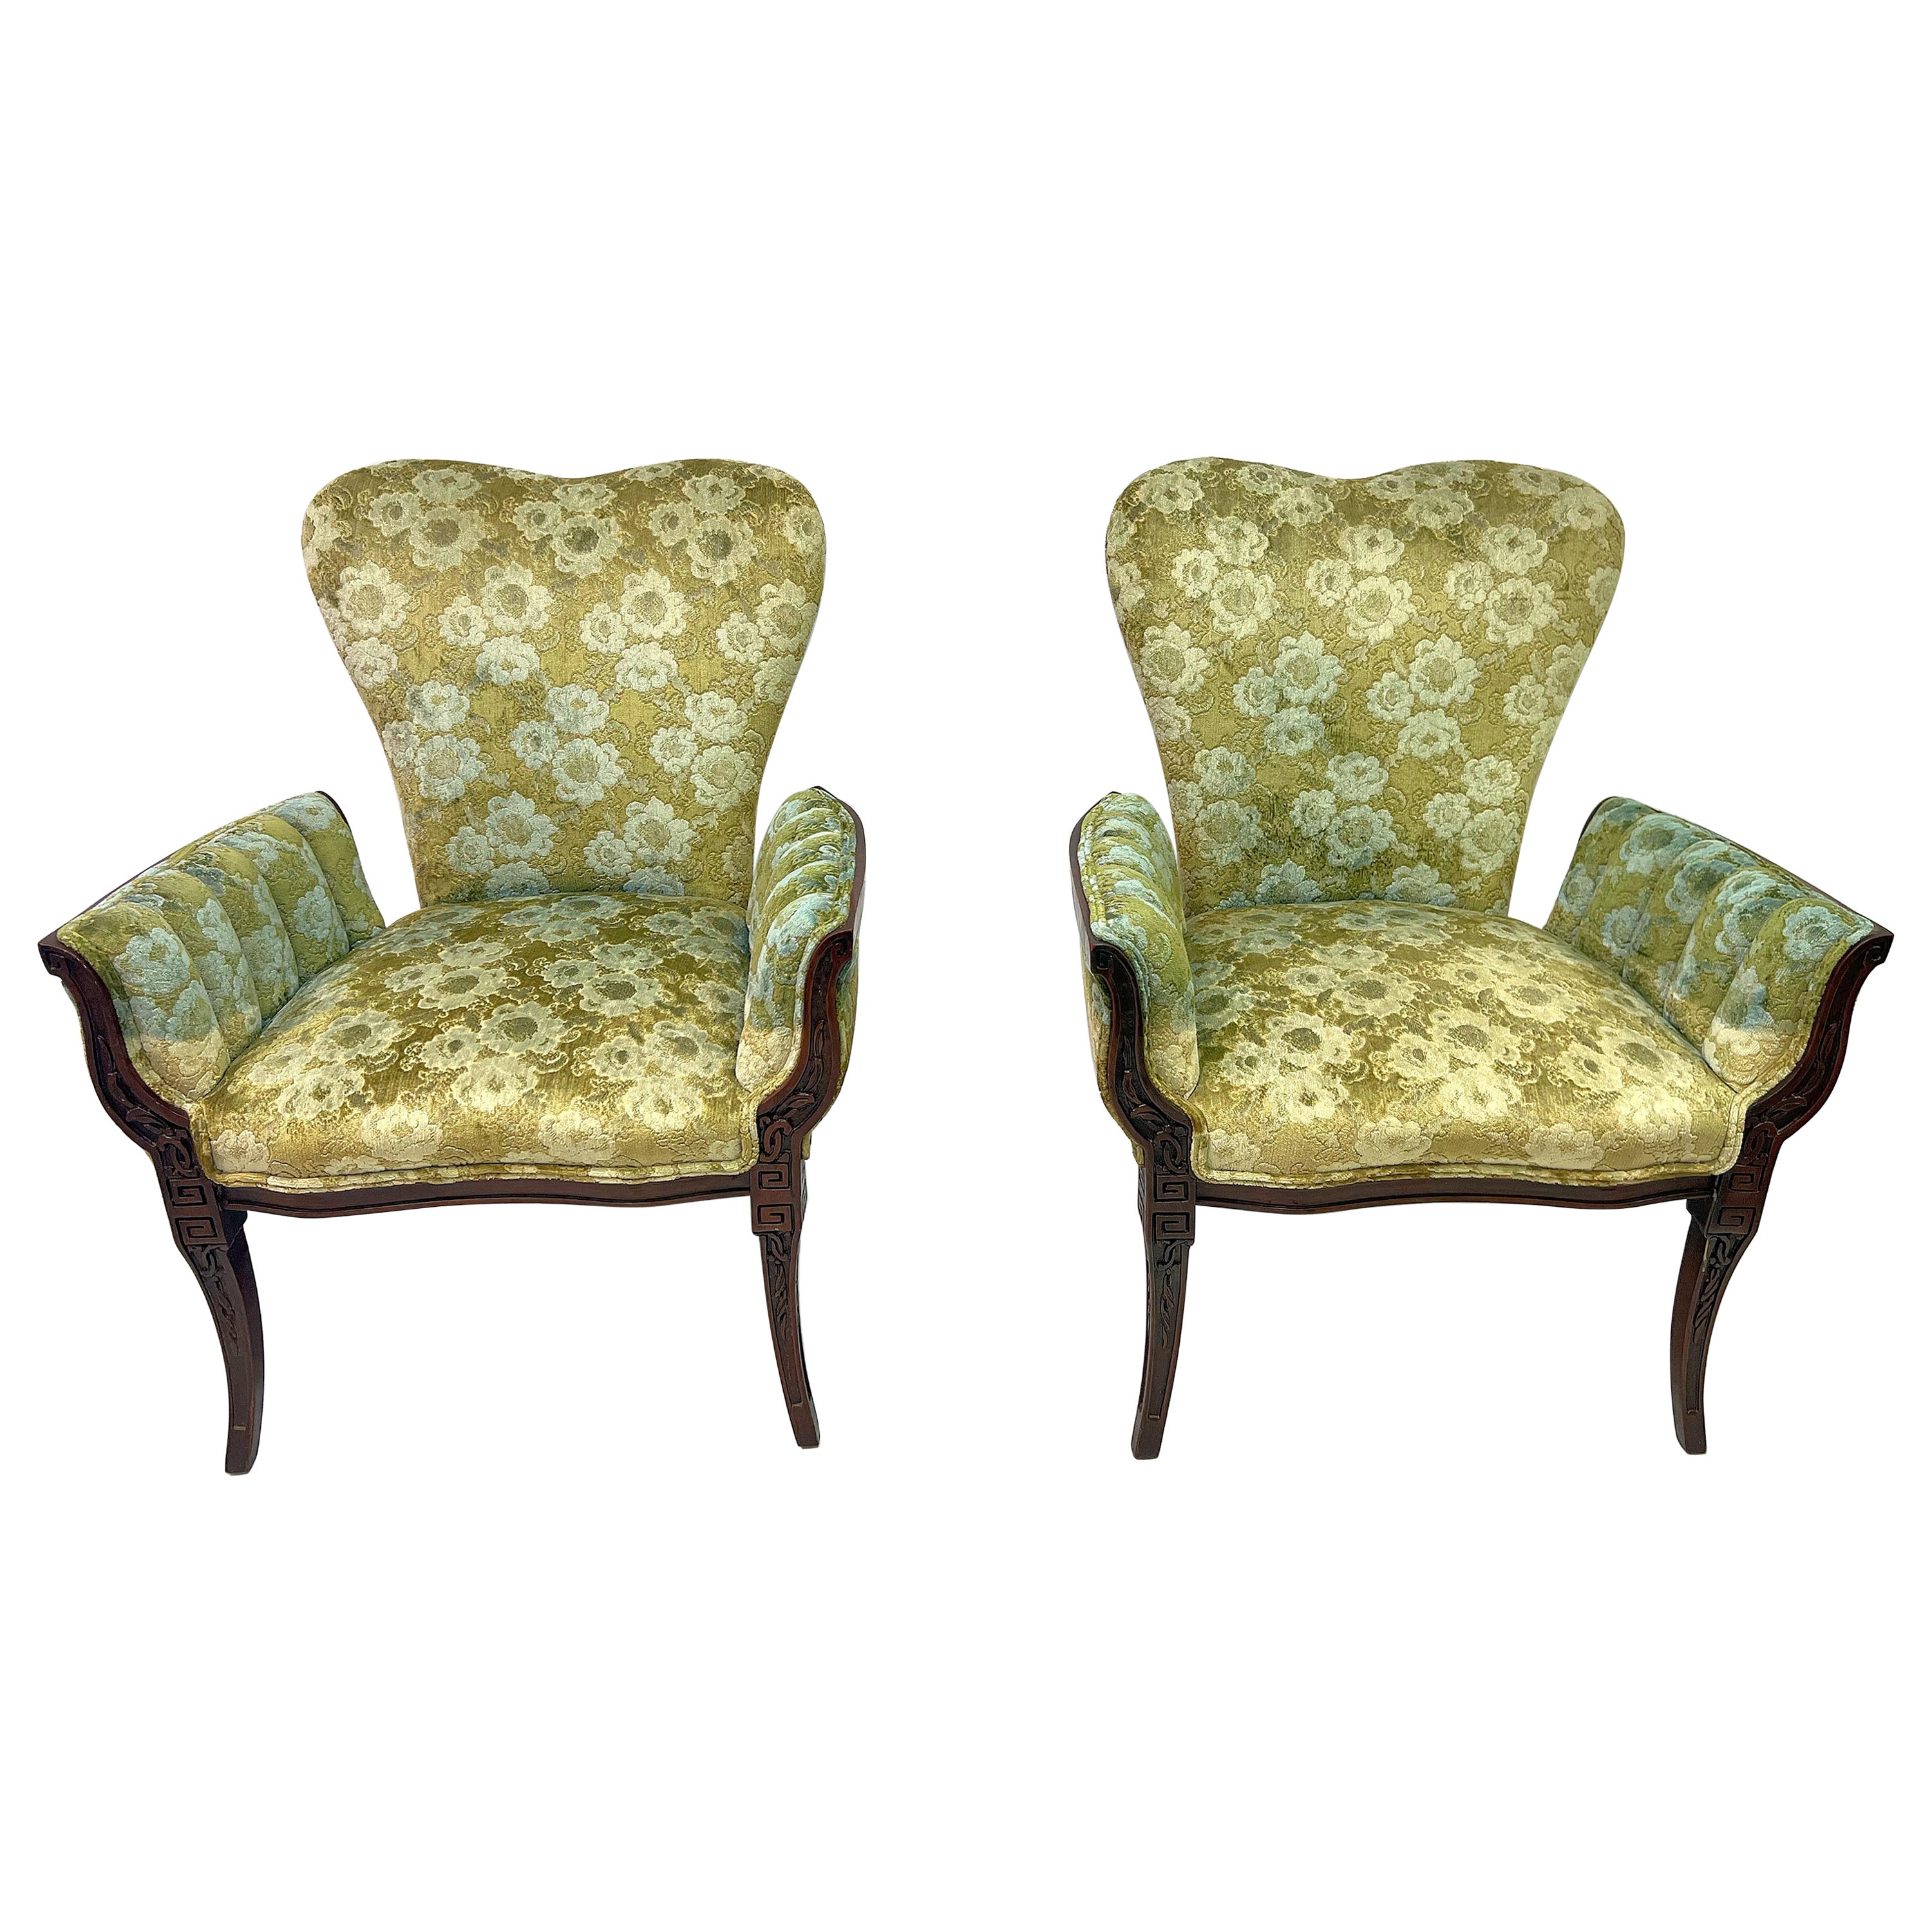 Grosfeld House Attributed Fireside Chairs in Green Floral Upholstery - a Pair For Sale